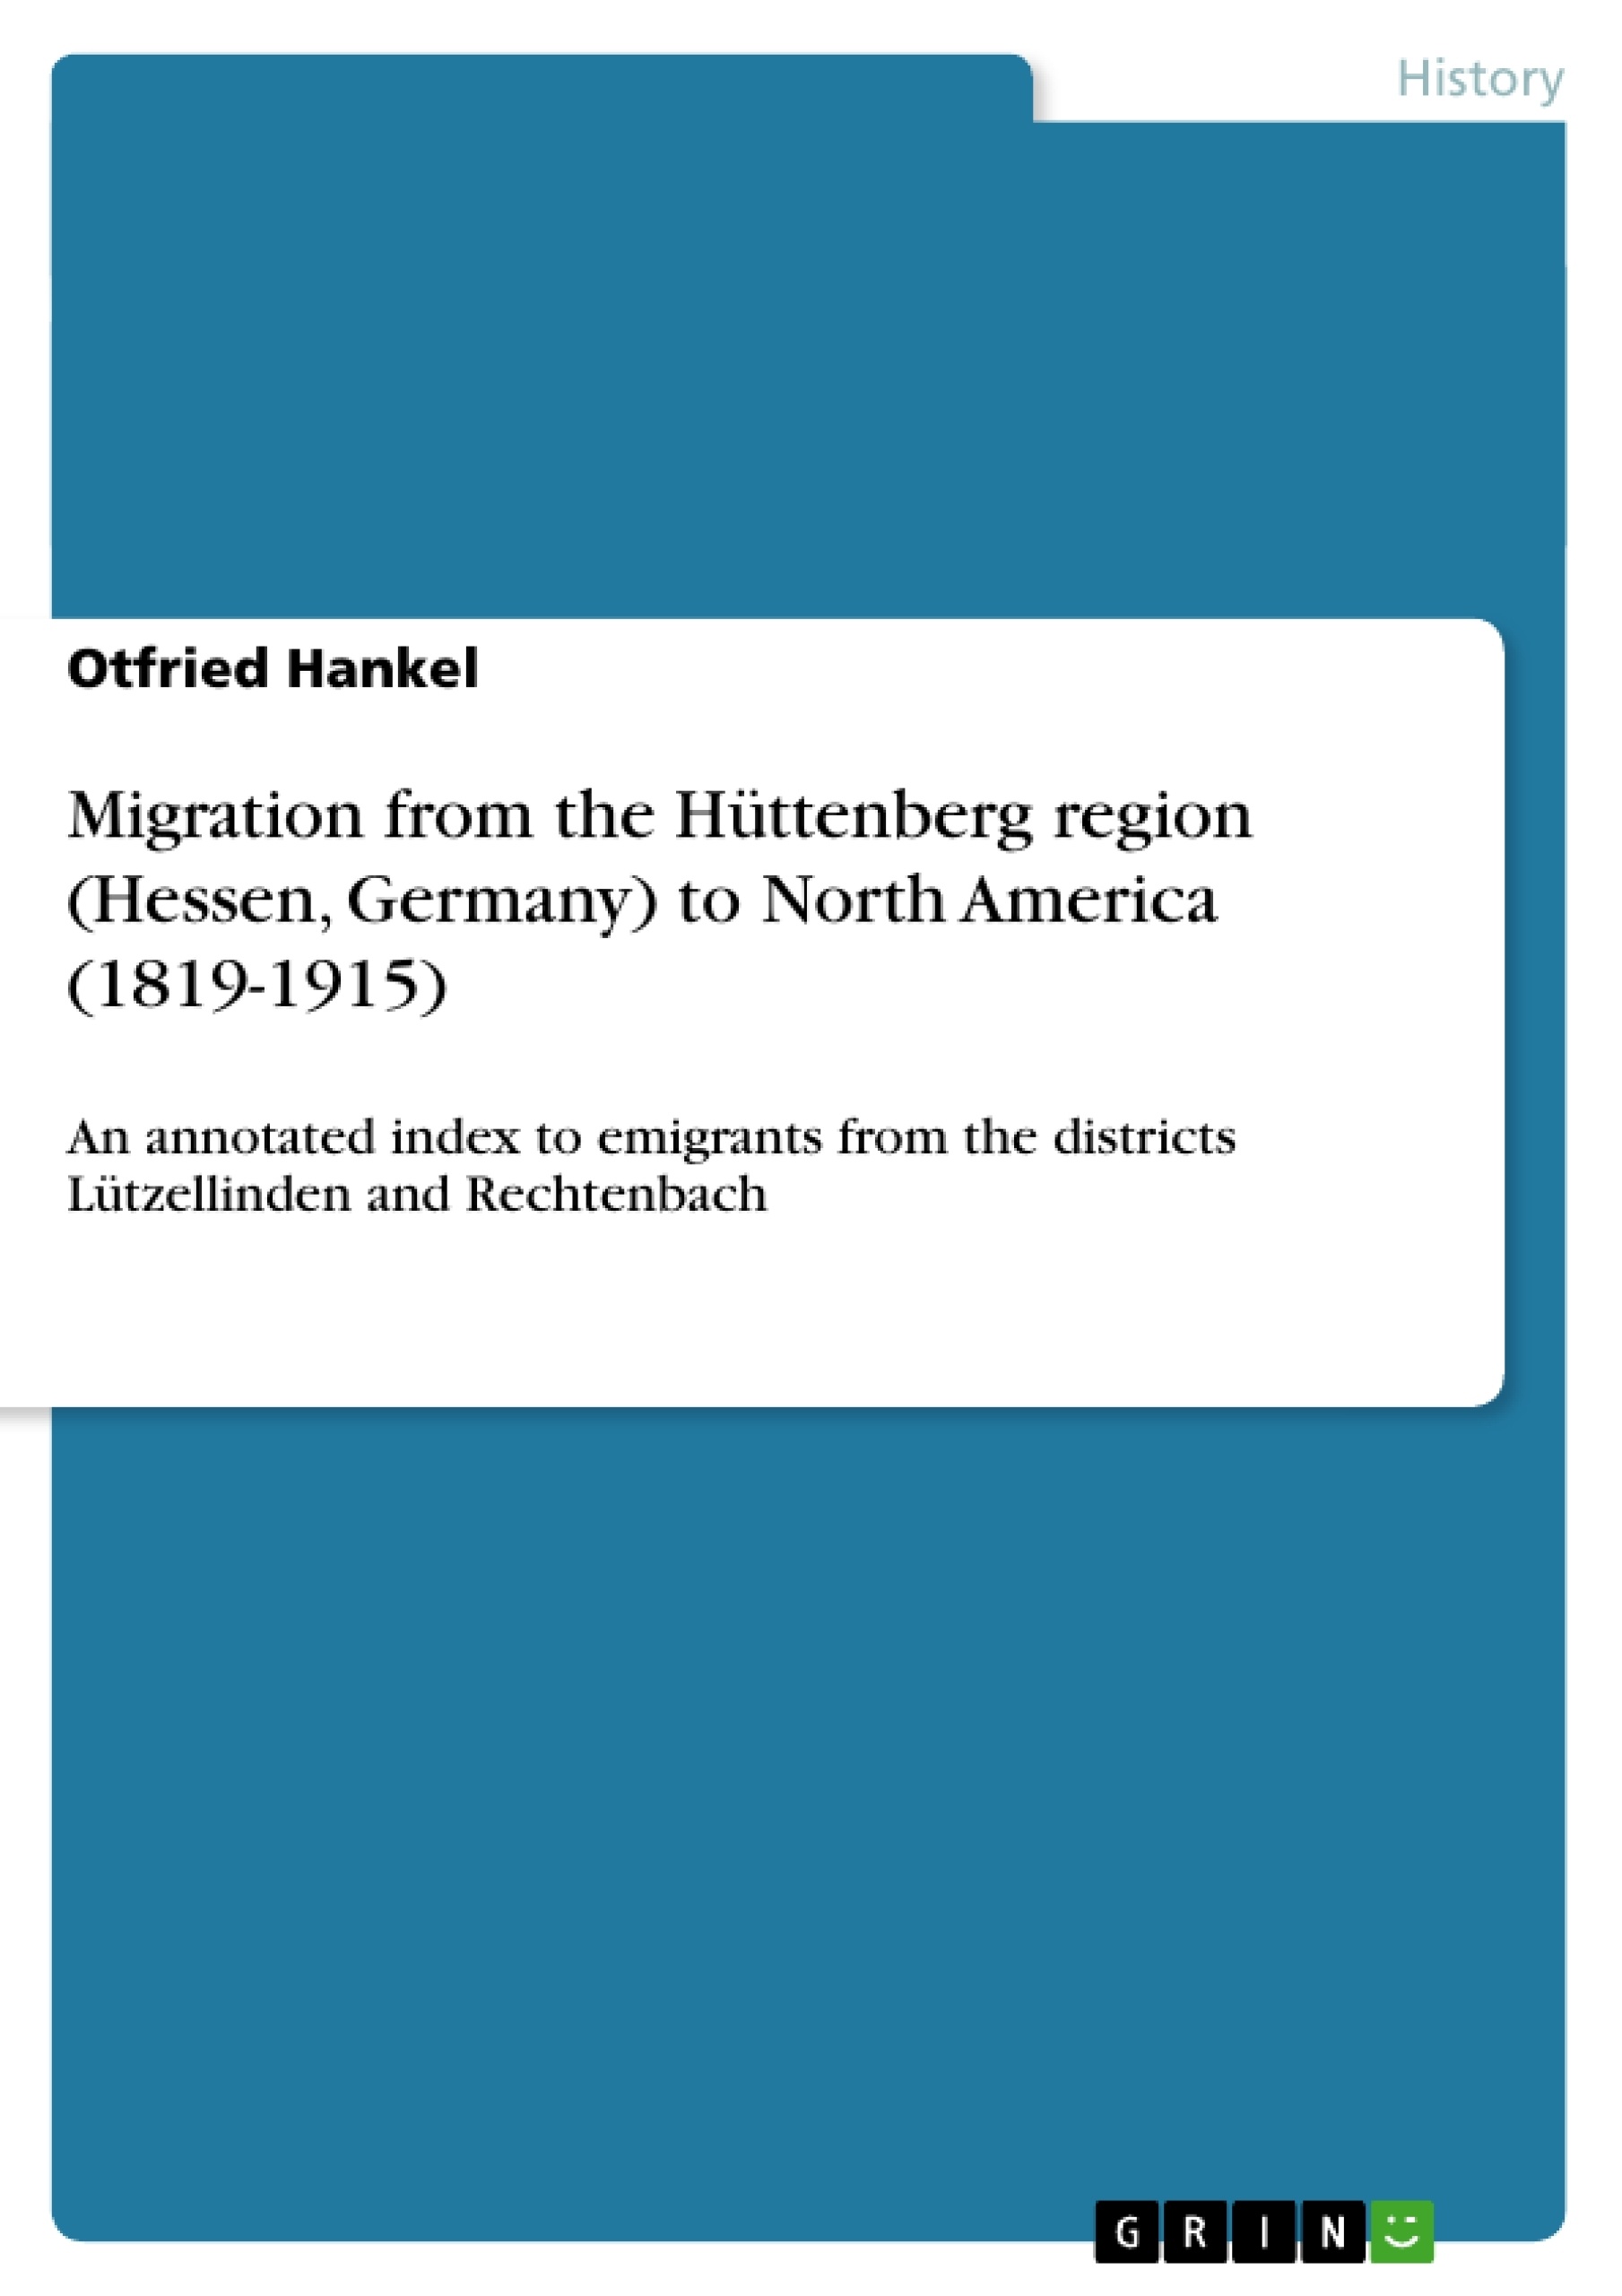 Title: Migration from the Hüttenberg region (Hessen, Germany) to North America (1819-1915)